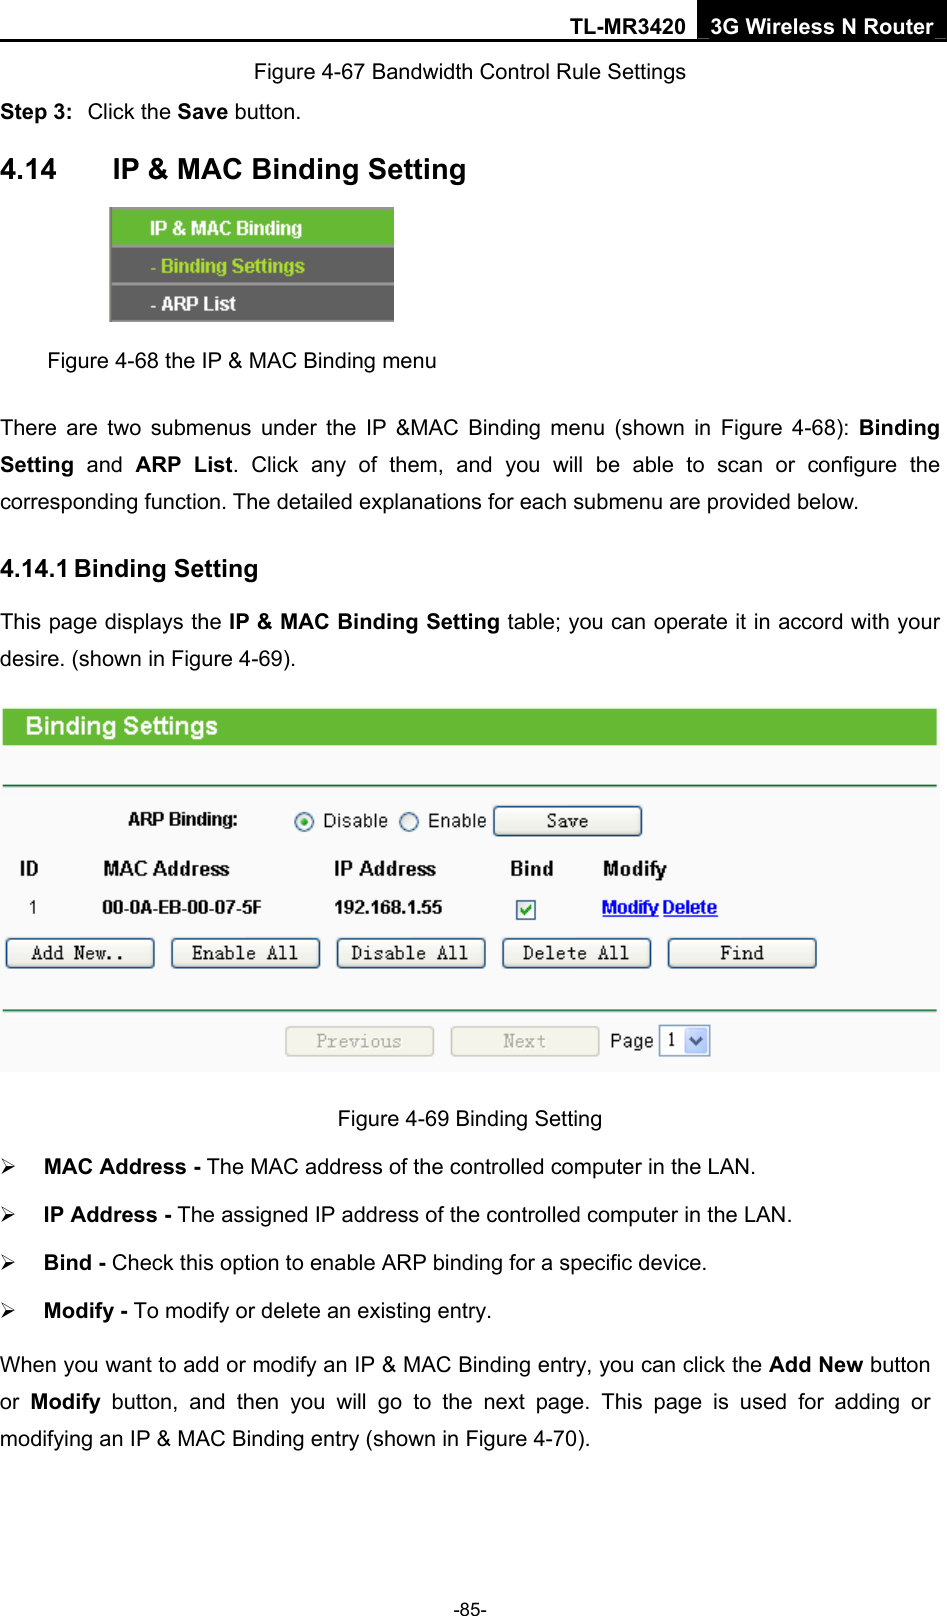 TL-MR3420 3G Wireless N Router -85- Figure 4-67 Bandwidth Control Rule Settings Step 3:  Click the Save button. 4.14  IP &amp; MAC Binding Setting  Figure 4-68 the IP &amp; MAC Binding menu There are two submenus under the IP &amp;MAC Binding menu (shown in Figure 4-68): Binding Setting  and ARP List. Click any of them, and you will be able to scan or configure the corresponding function. The detailed explanations for each submenu are provided below. 4.14.1 Binding Setting This page displays the IP &amp; MAC Binding Setting table; you can operate it in accord with your desire. (shown in Figure 4-69).    Figure 4-69 Binding Setting ¾ MAC Address - The MAC address of the controlled computer in the LAN.   ¾ IP Address - The assigned IP address of the controlled computer in the LAN.   ¾ Bind - Check this option to enable ARP binding for a specific device.   ¾ Modify - To modify or delete an existing entry.   When you want to add or modify an IP &amp; MAC Binding entry, you can click the Add New button or  Modify button, and then you will go to the next page. This page is used for adding or modifying an IP &amp; MAC Binding entry (shown in Figure 4-70).   